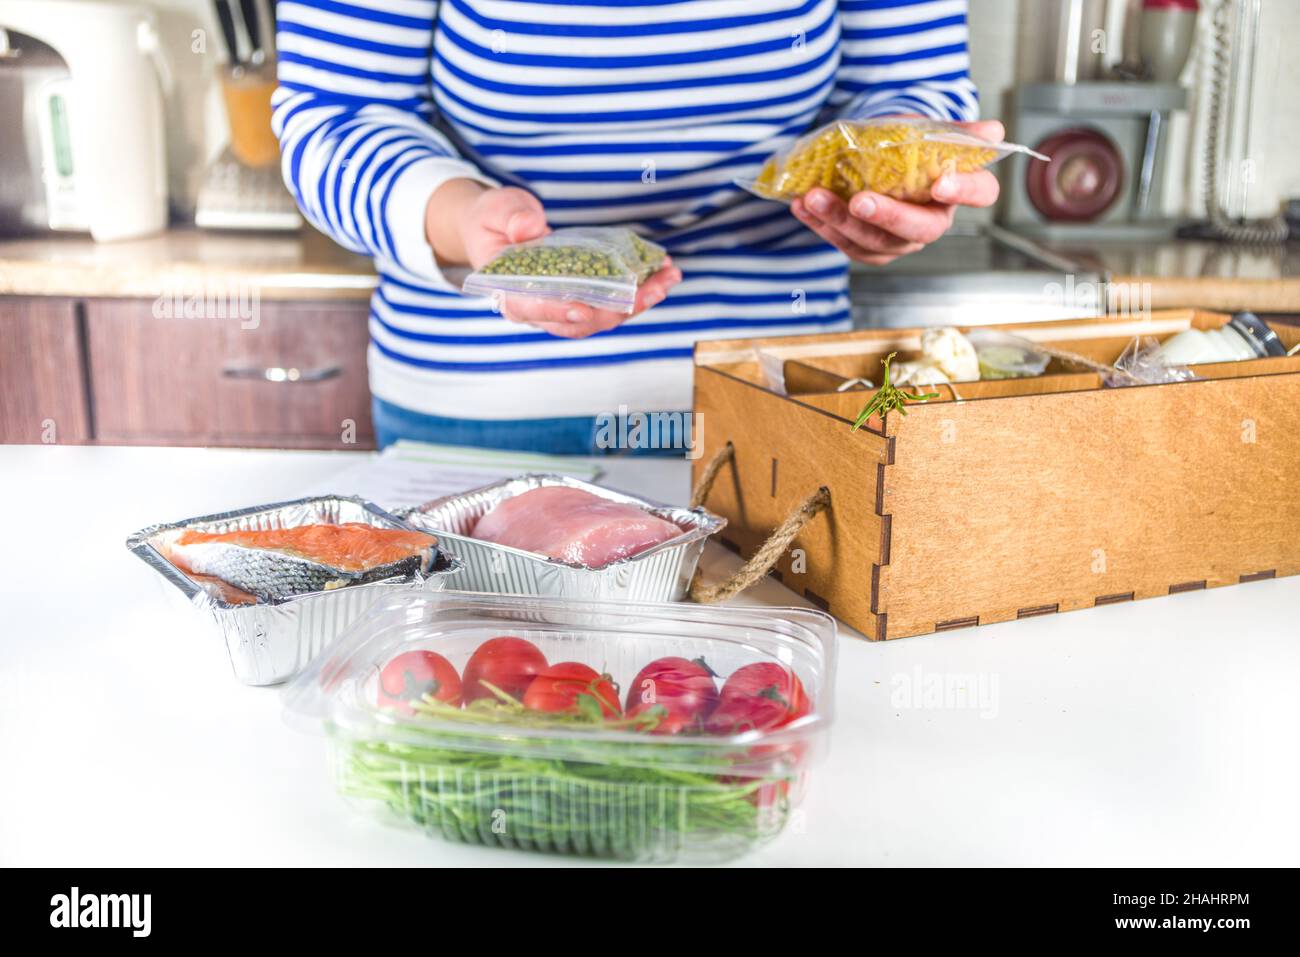 Caucasian woman take apart box with delivery of ingredients, recipes. Meal Kit Delivery Concept. Set various healthy foods with recipes for cooking. O Stock Photo